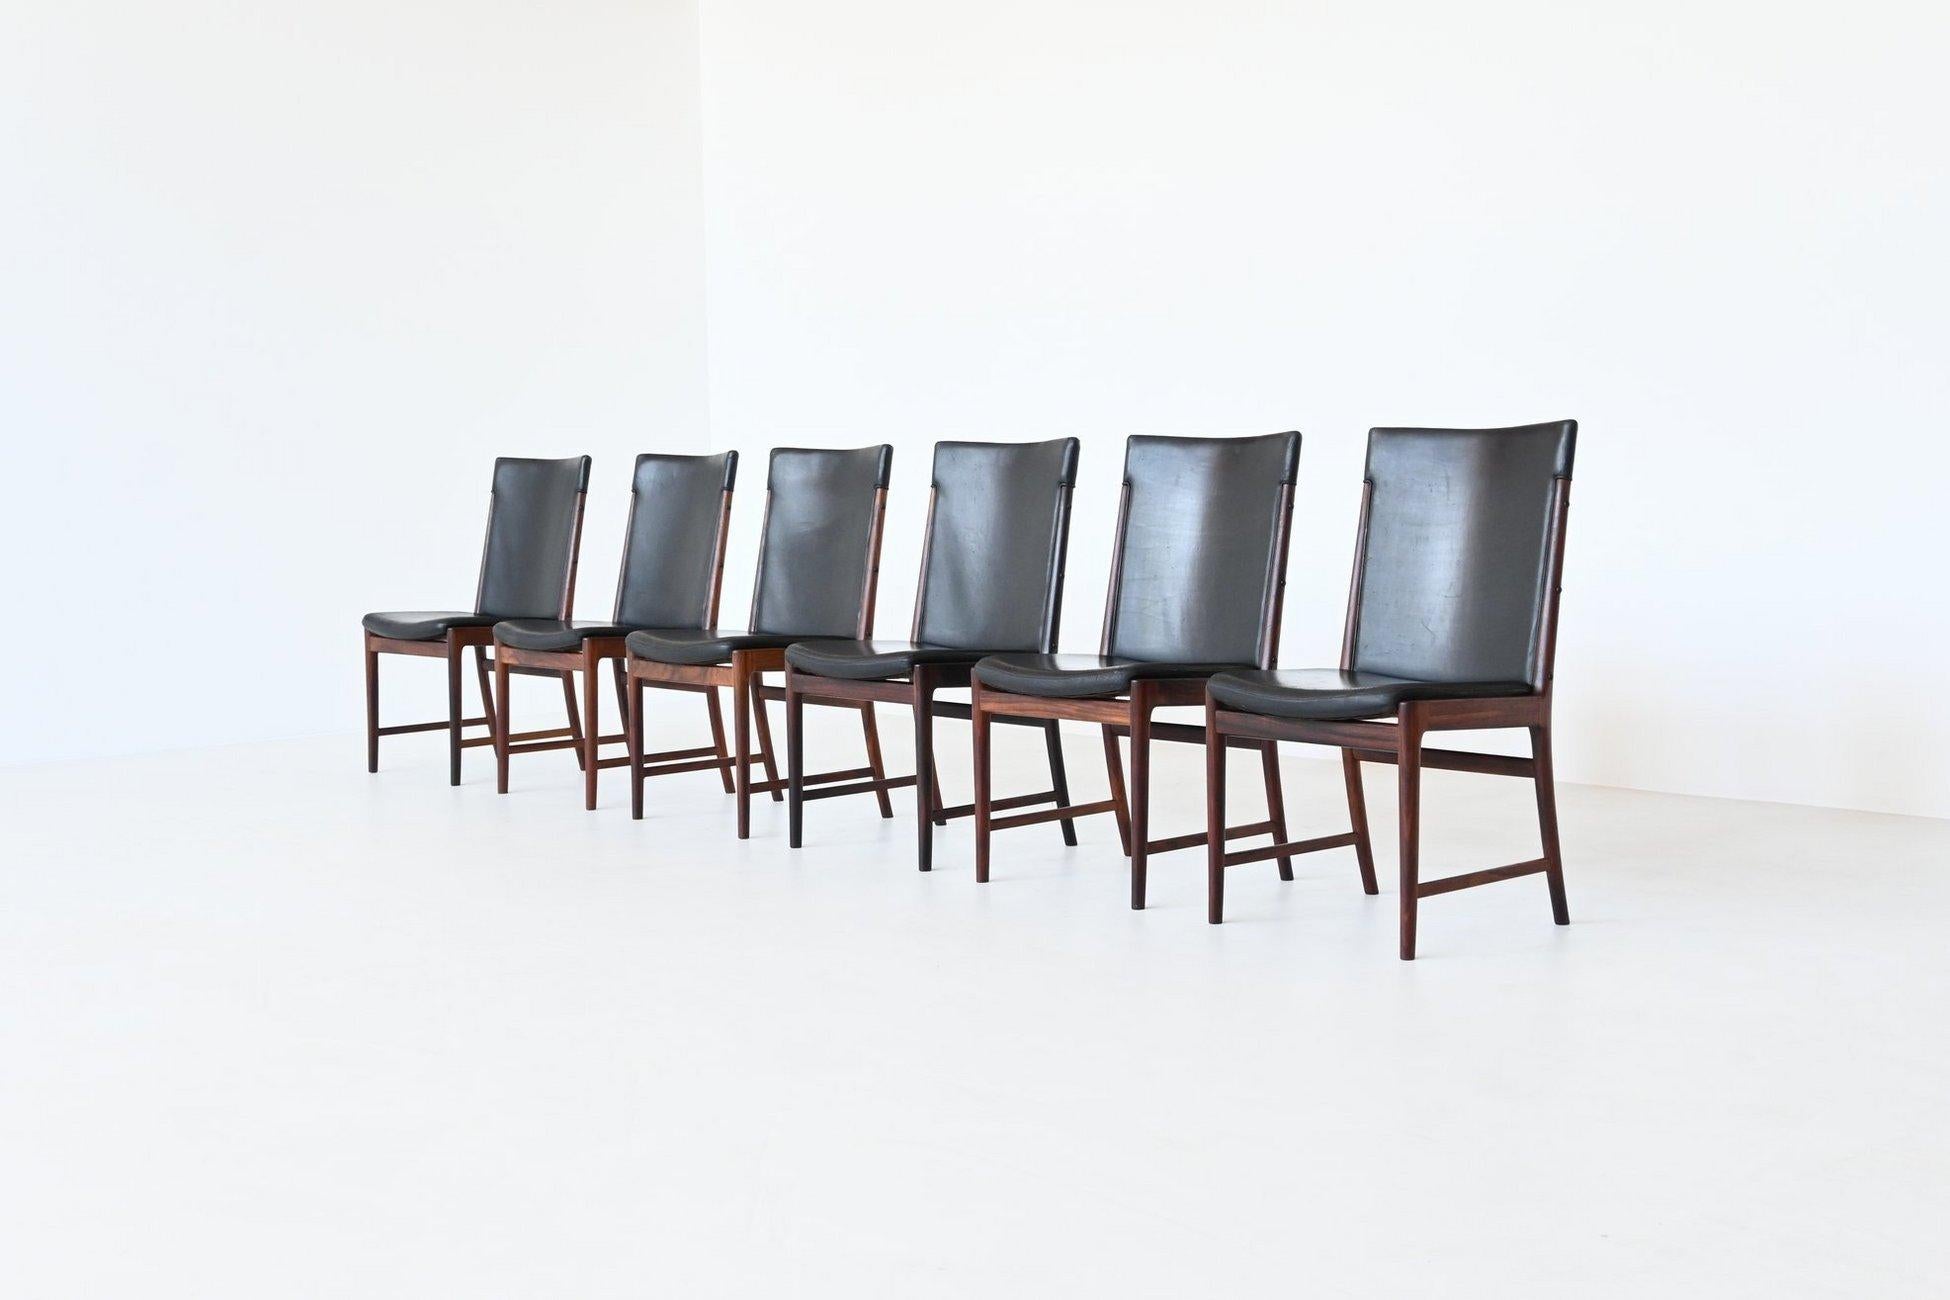 Stunning set of six beautiful shaped and well-crafted dining chairs designed by Kai Lyngfledt Larsen and manufactured by Søren Willadsen, Denmark 1960. These chairs are made of nicely grained solid Brazilian rosewood and the seats are upholstered